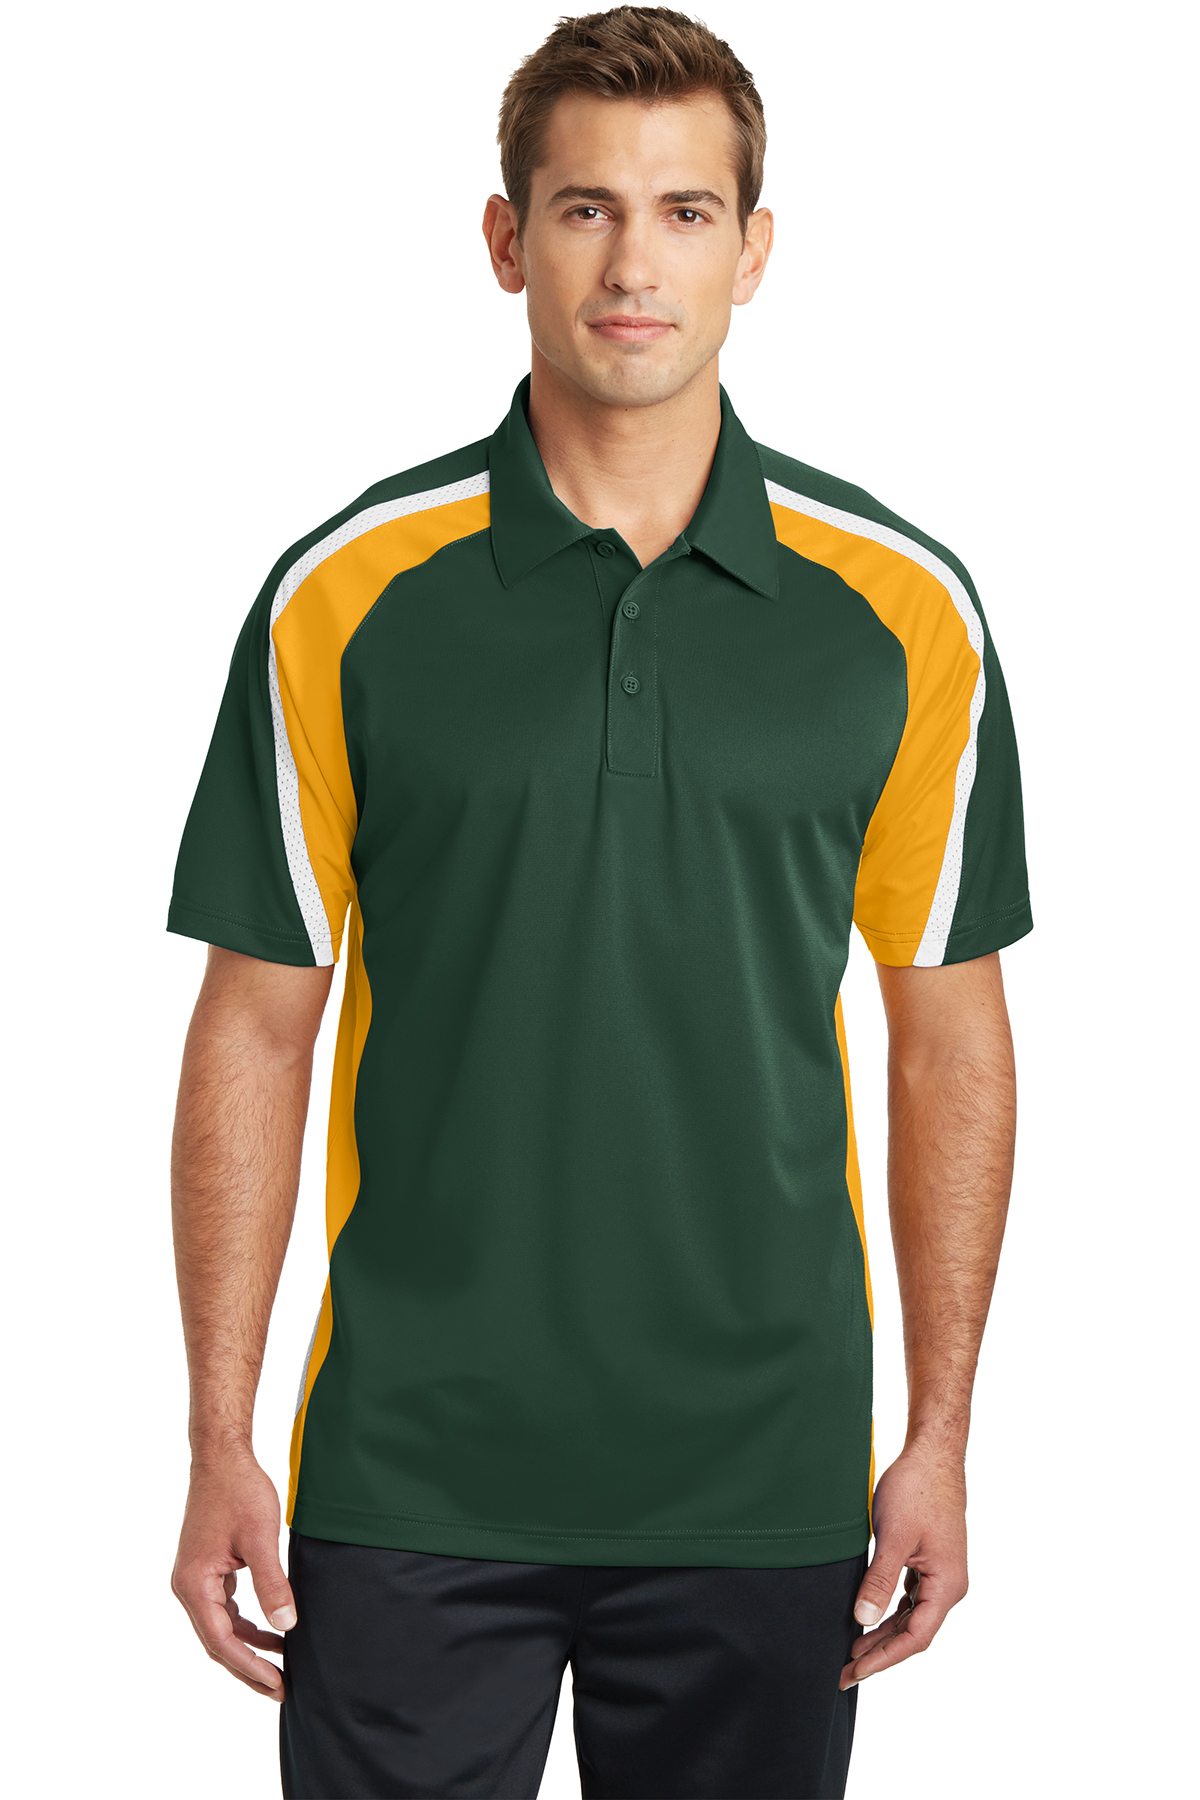 ST654 Sport-Tek® Tricolor Micropique Sport-Wick® Polo with mesh ...